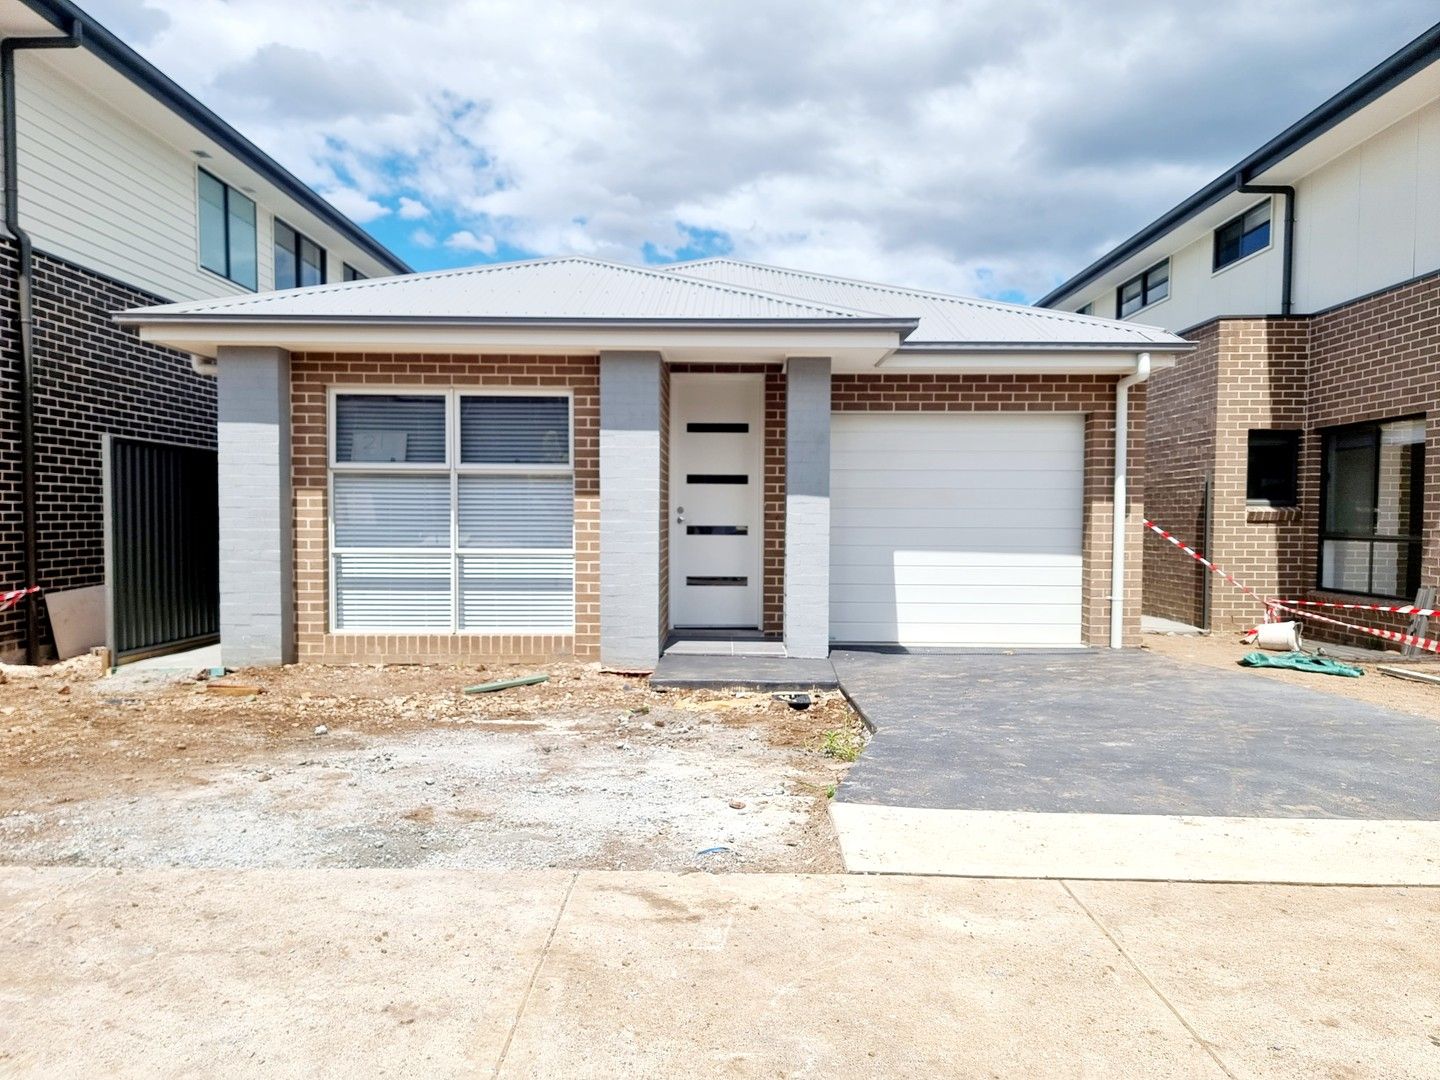 4 bedrooms House in 21 Barabung Street AUSTRAL NSW, 2179